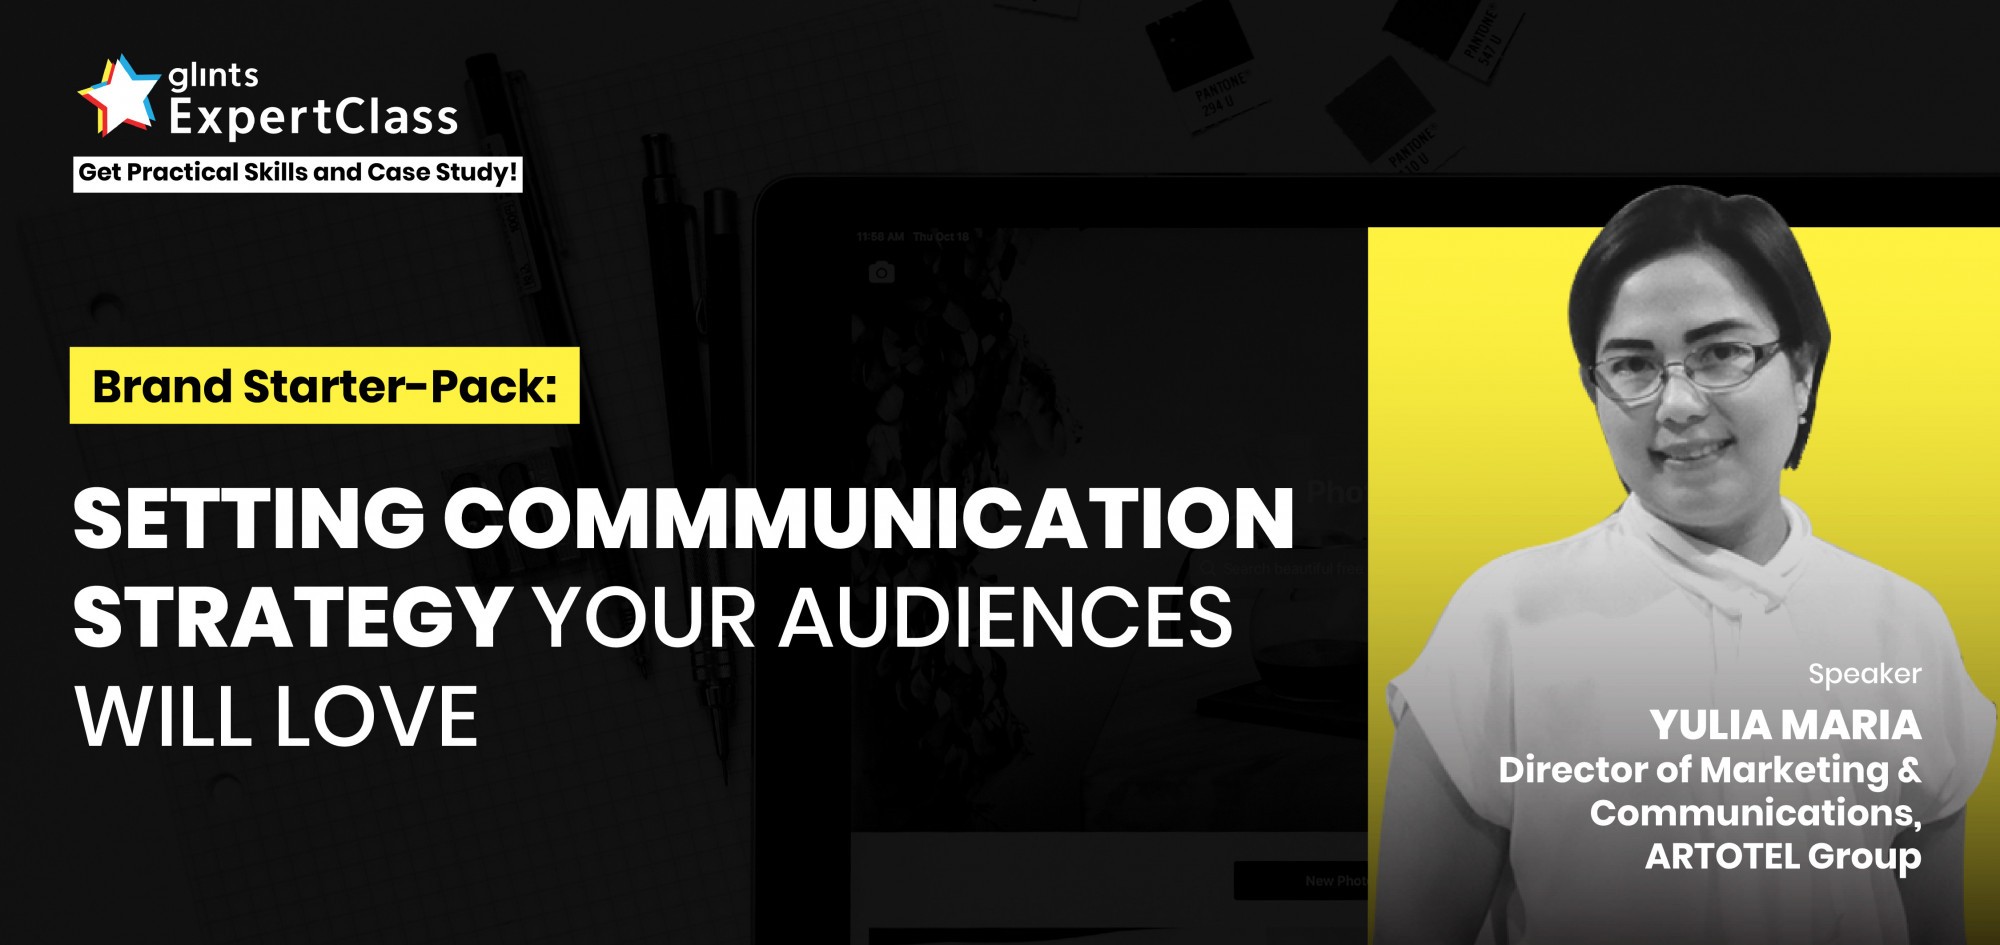 [Online Glints ExpertClass] Setting Communication Strategy Your Audiences Will Love